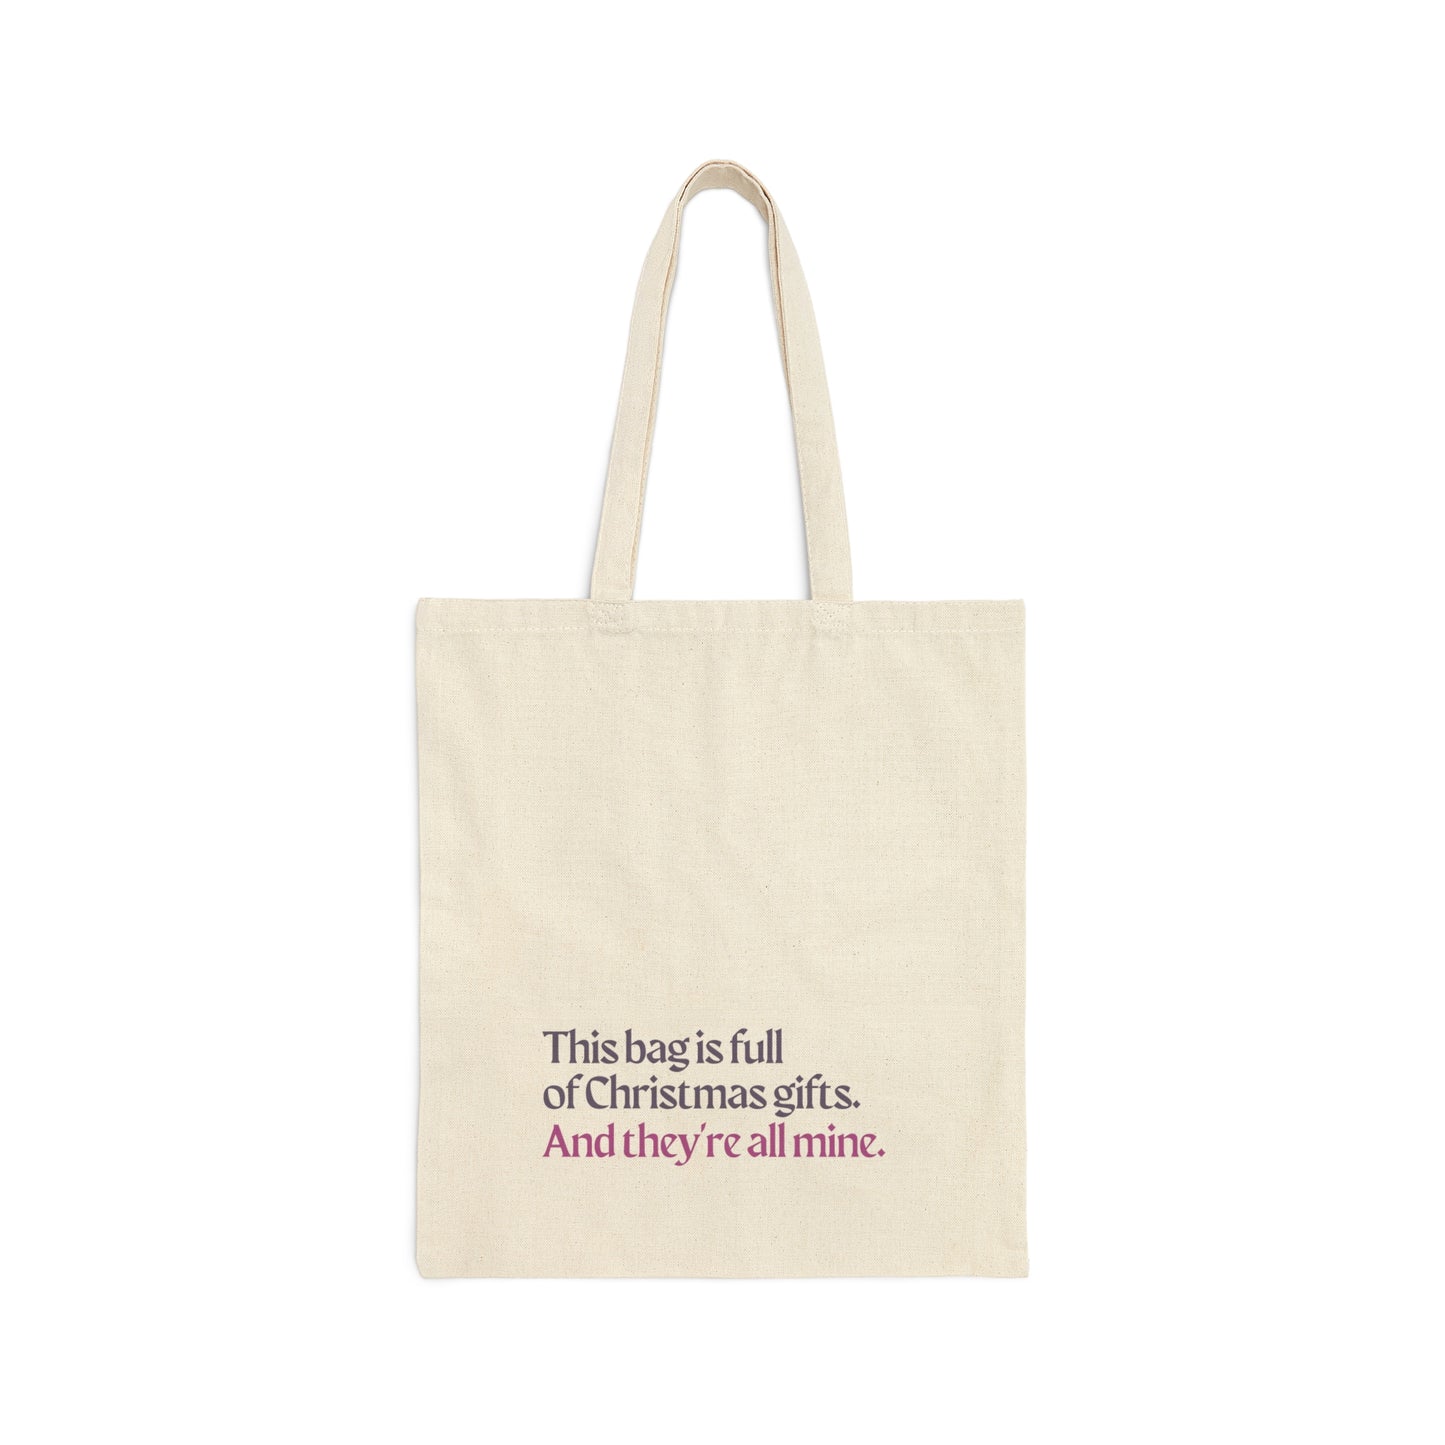 My Gifts: Canvas Tote Bag